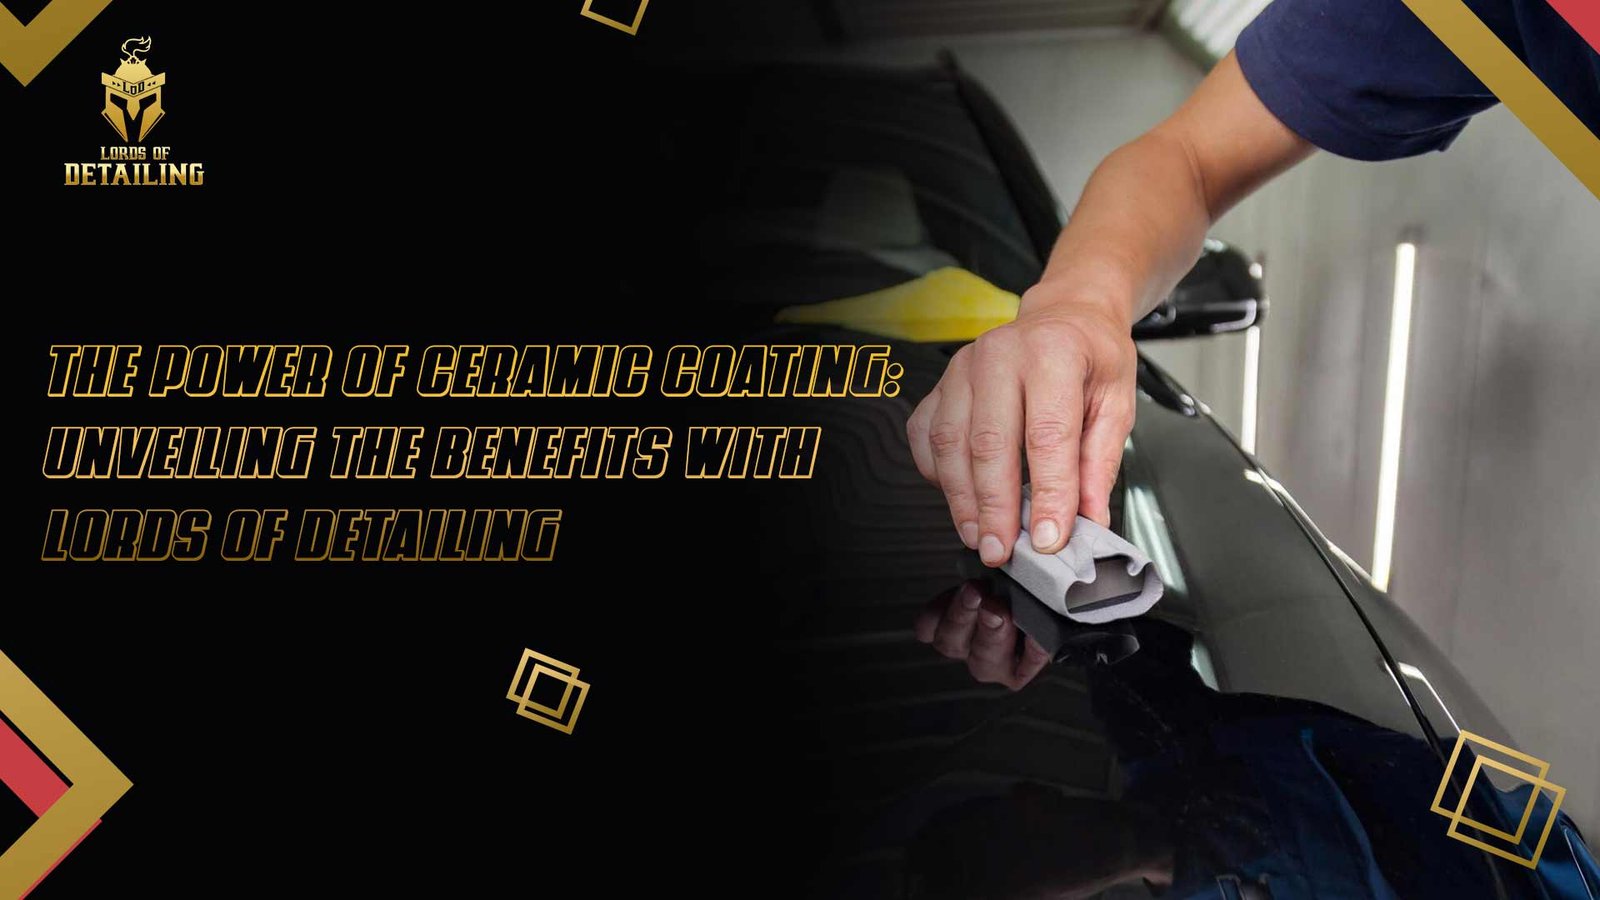 Making Your Car Shine: The Magic of Ceramic Coating by Lords of